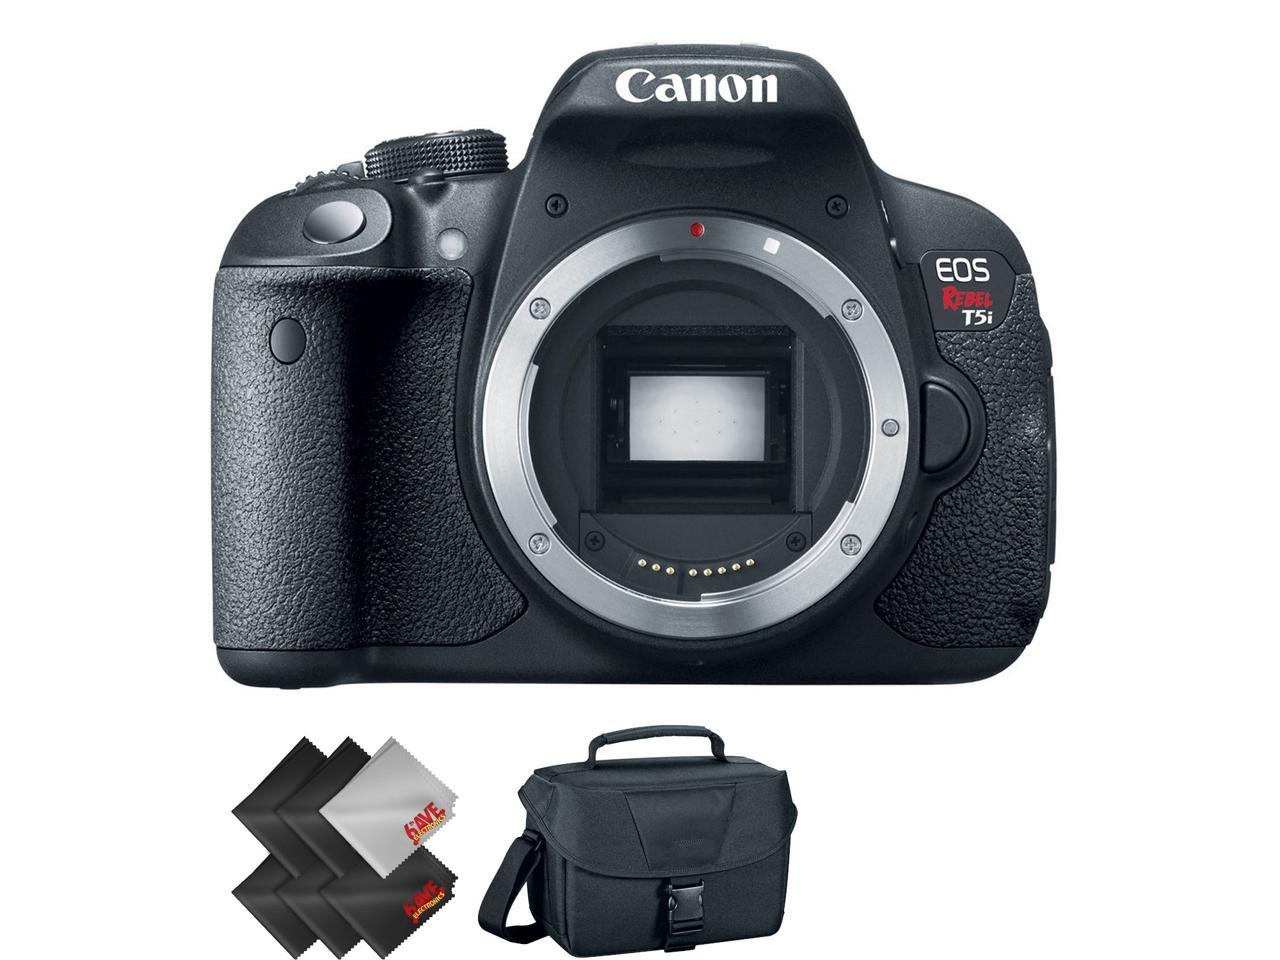 spts service software for canon eos digital